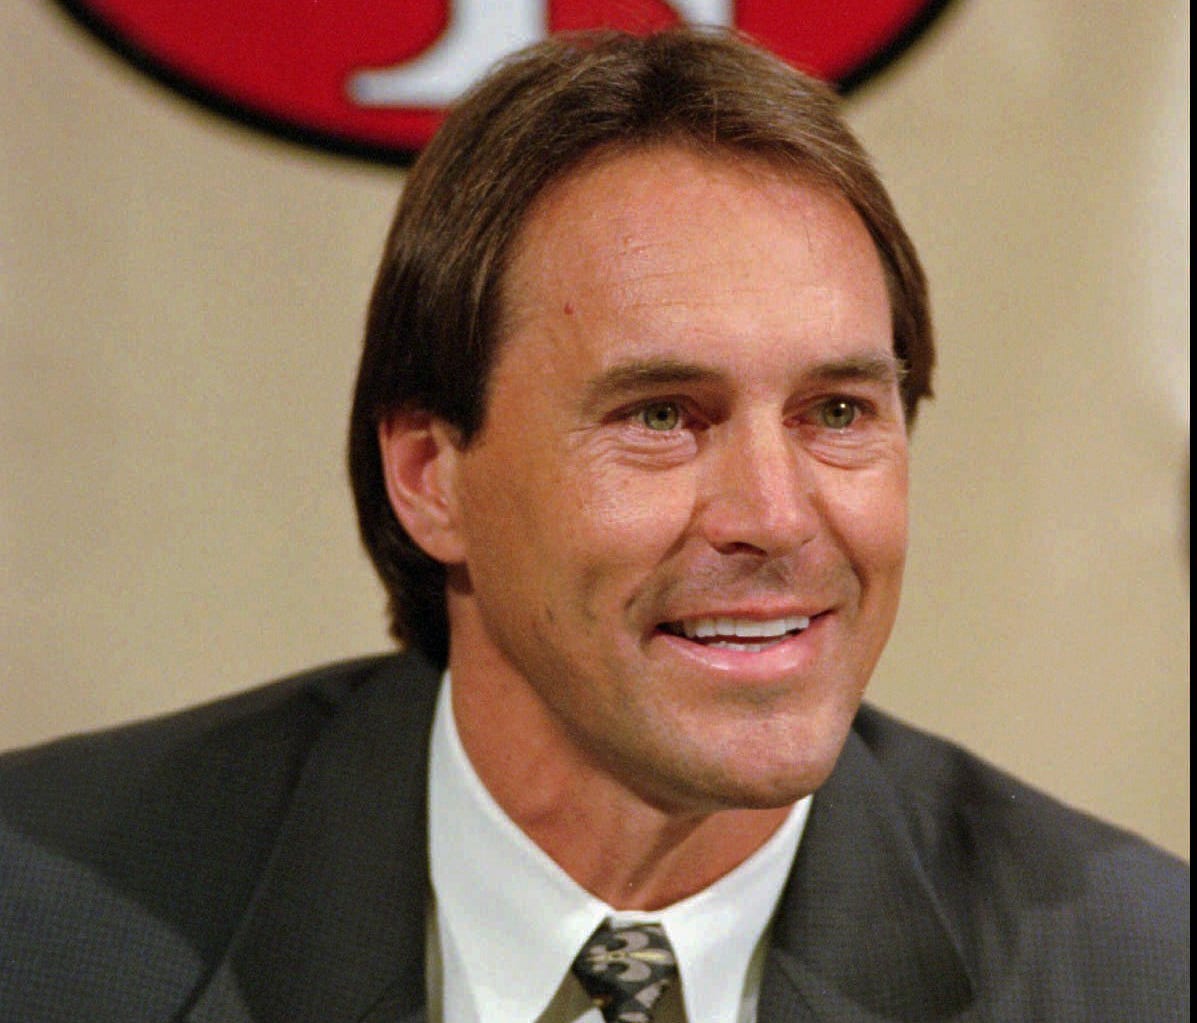 Former San Francisco 49ers executive Dwight Clark smiles during a news conference at the 49ers training camp in Santa Clara, Calif., Tuesday, Feb. 7, 1995.  Clark played nine seasons as wide receiver for the 49ers from 1979-1987.